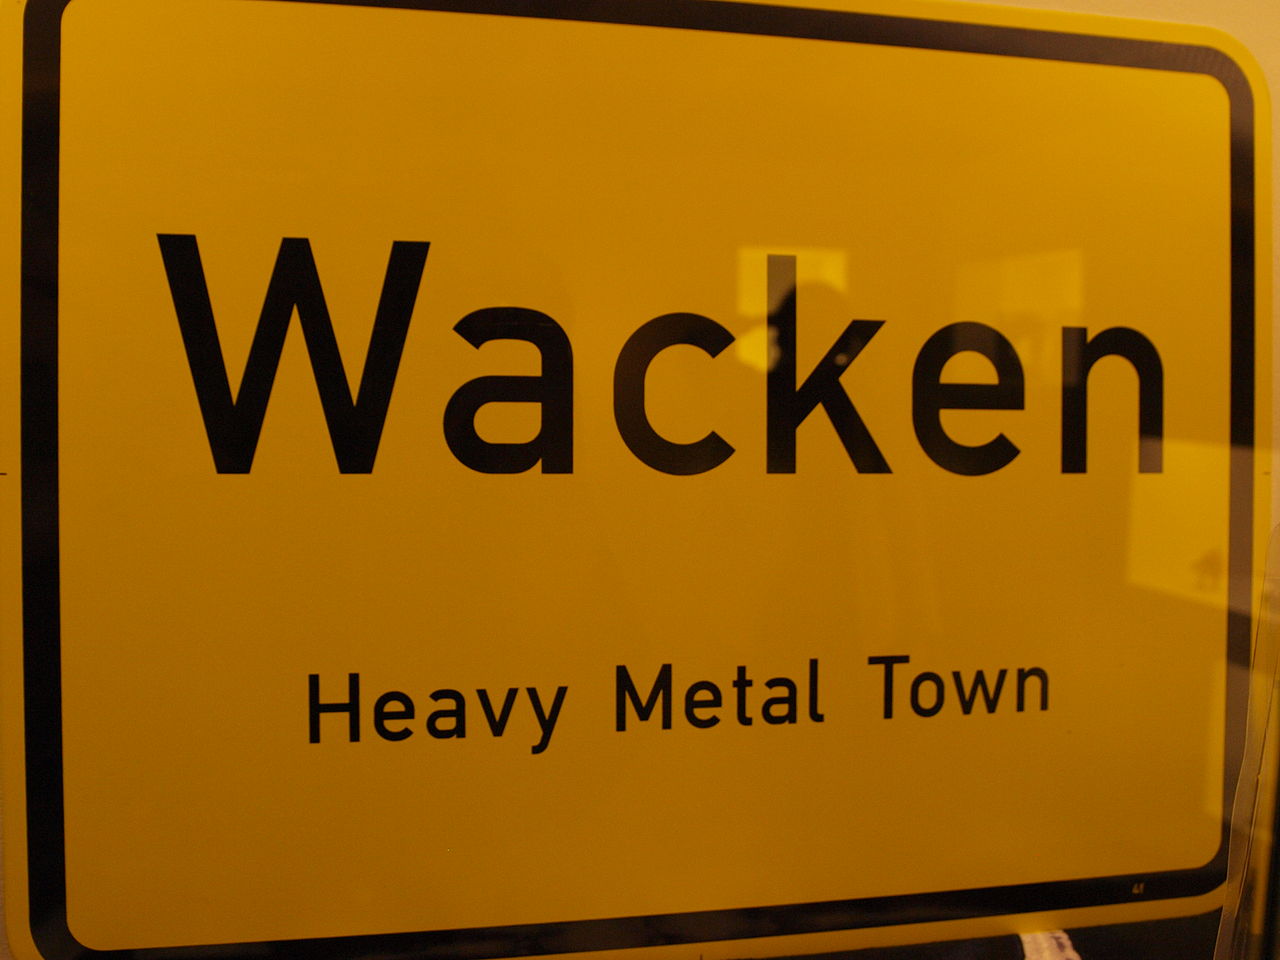 Everything you need to know about Wacken from A to Z